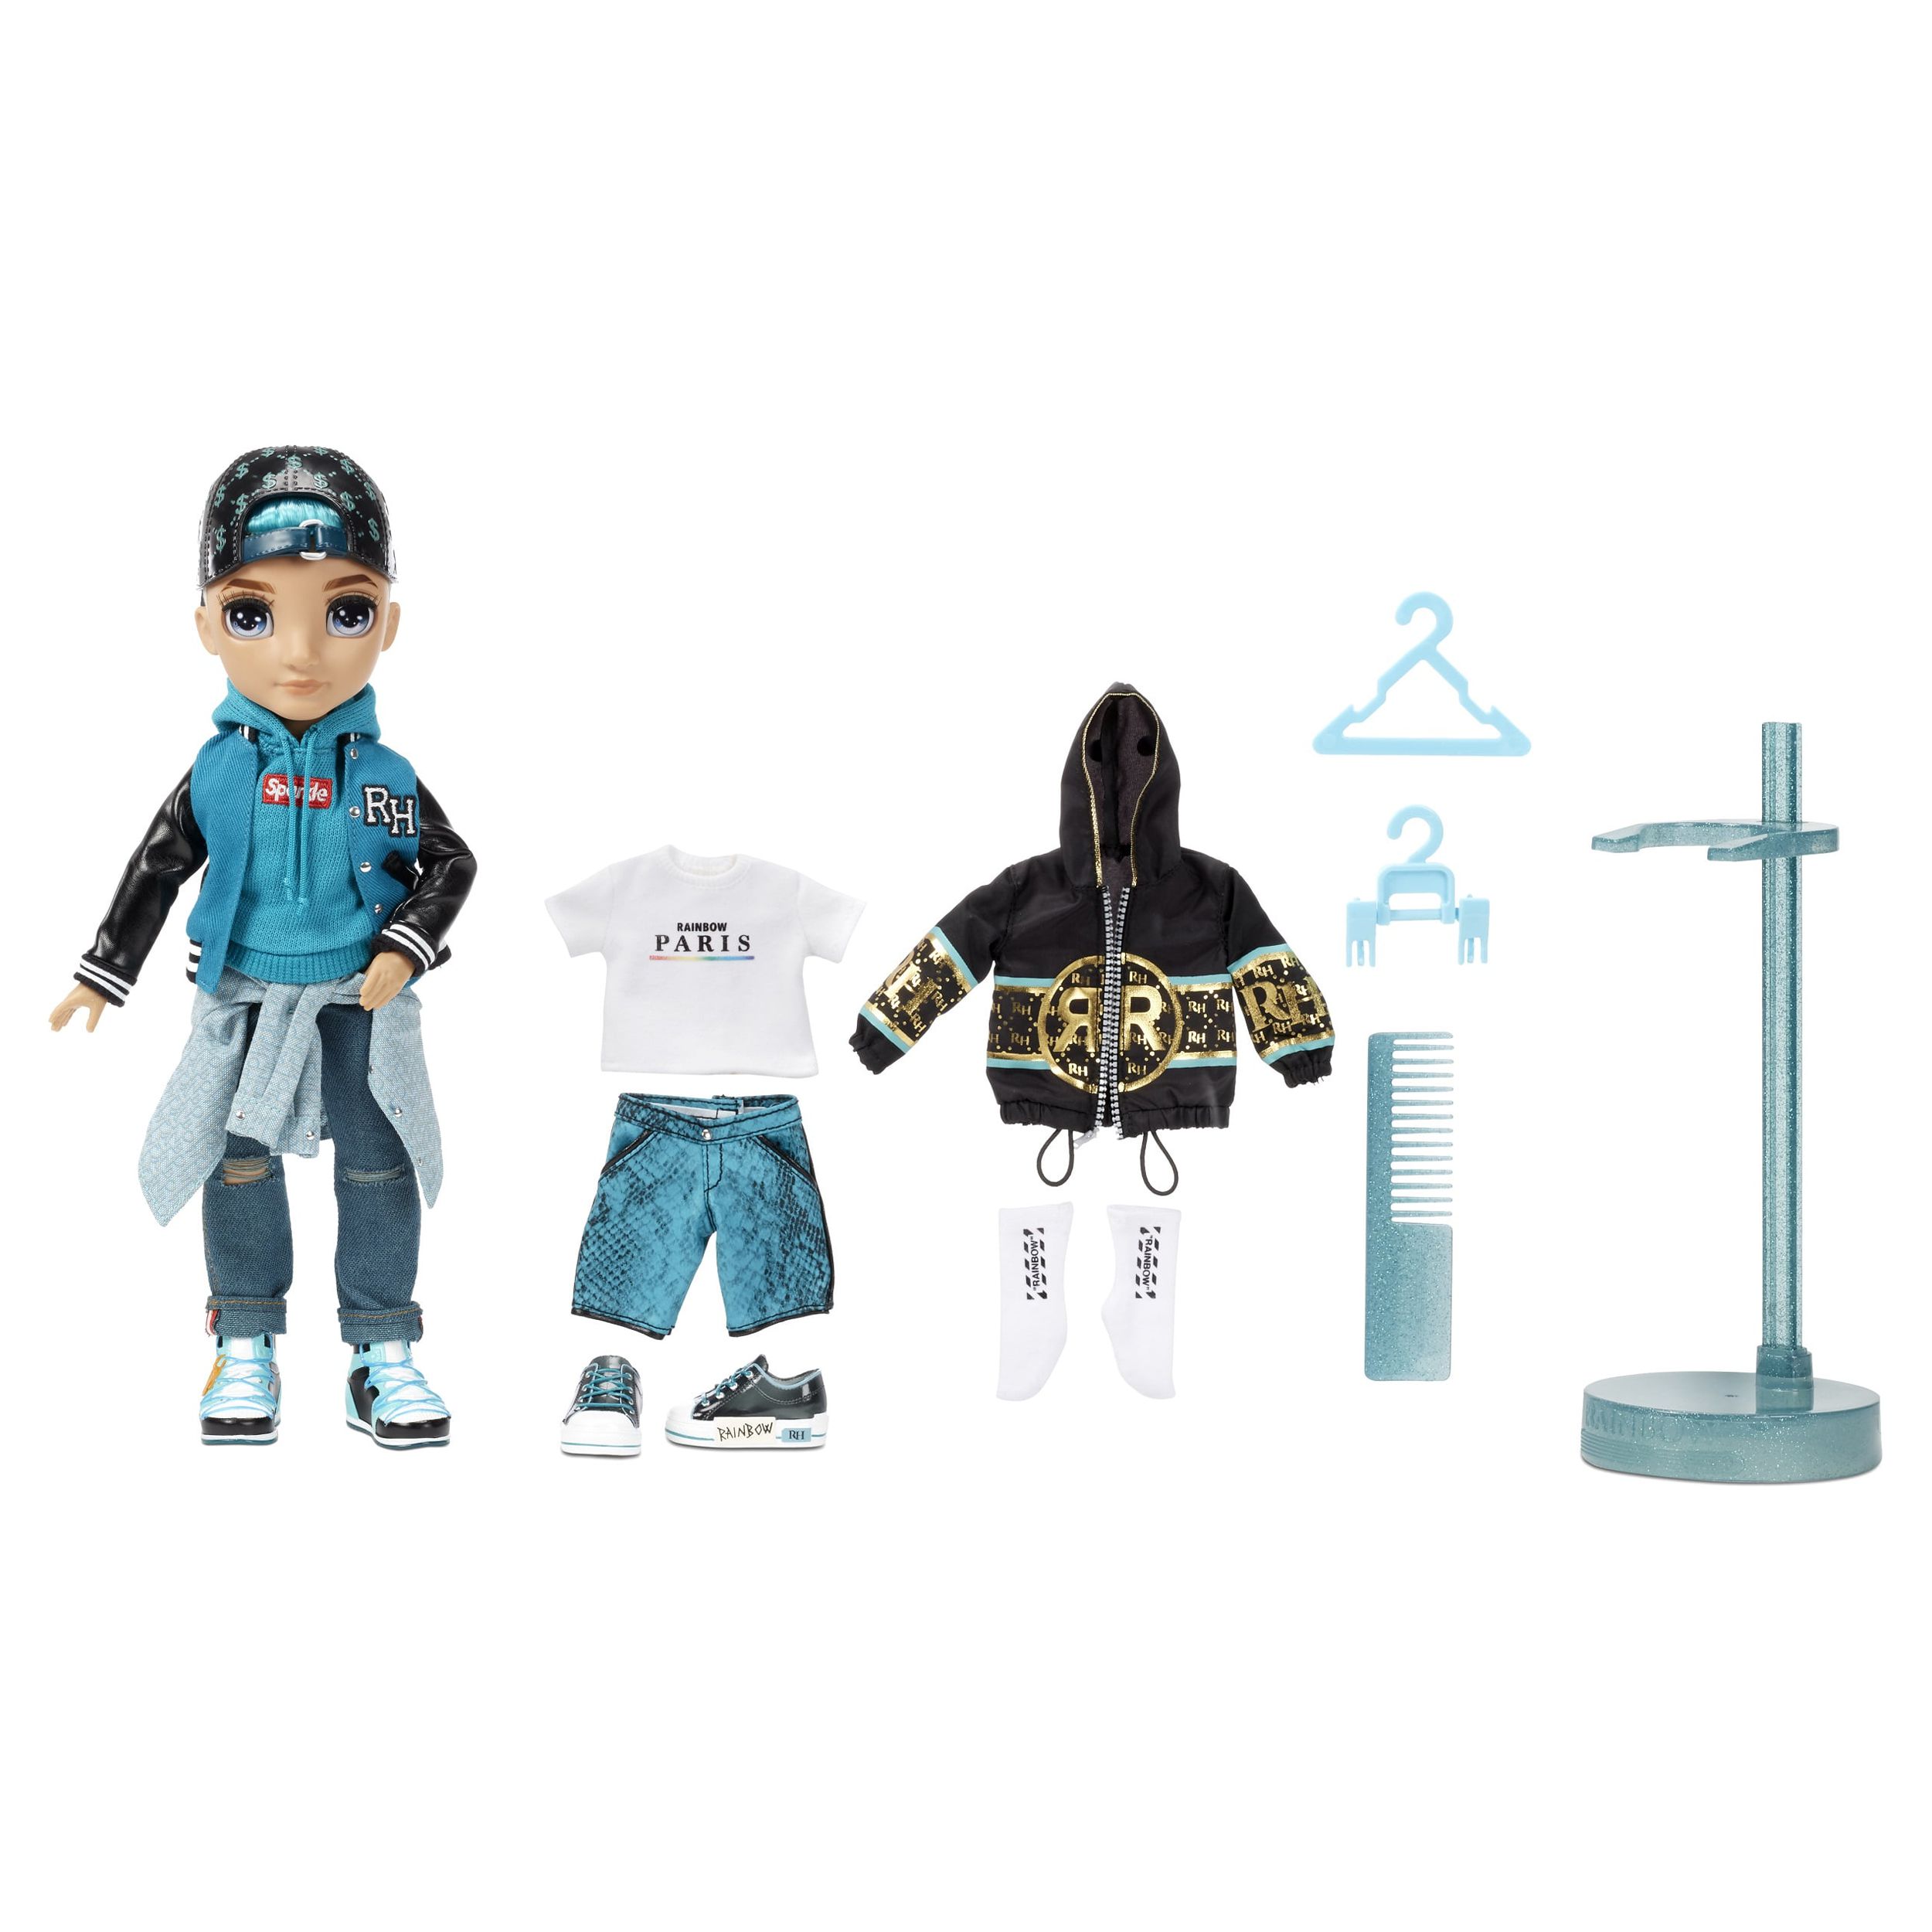 Rainbow High River Kendall – Teal Boy Fashion Doll with 2 Complete Mix & Match Outfits and Accessories, Toys for Kids 6-12 Years Old - image 1 of 7